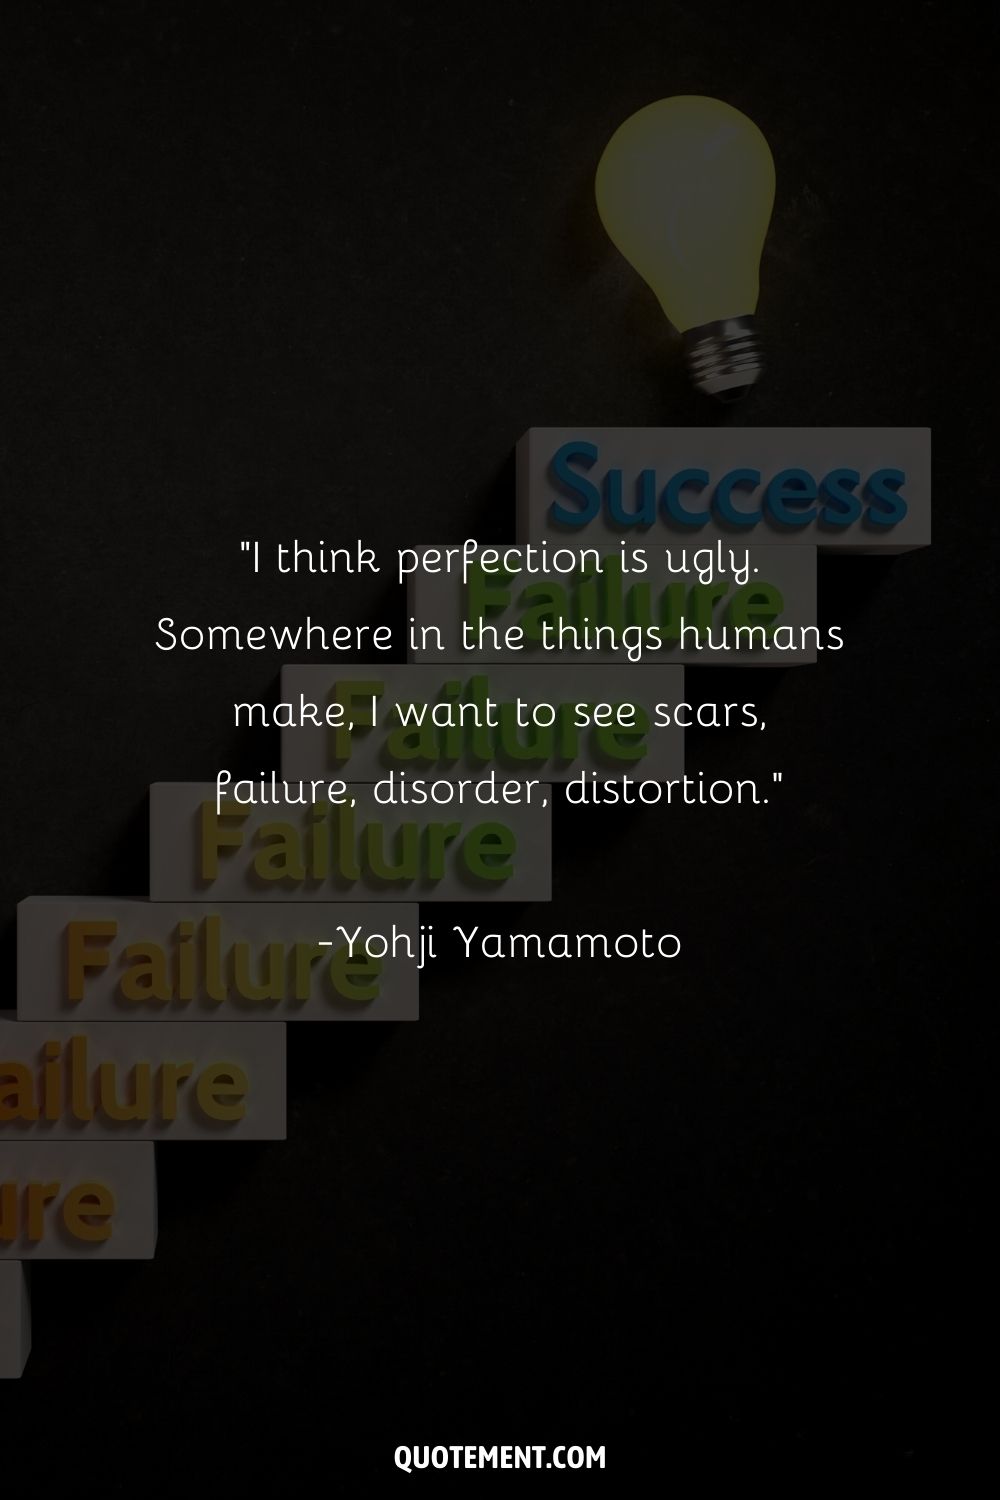 “I think perfection is ugly. Somewhere in the things humans make, I want to see scars, failure, disorder, distortion.” ― Yohji Yamamoto